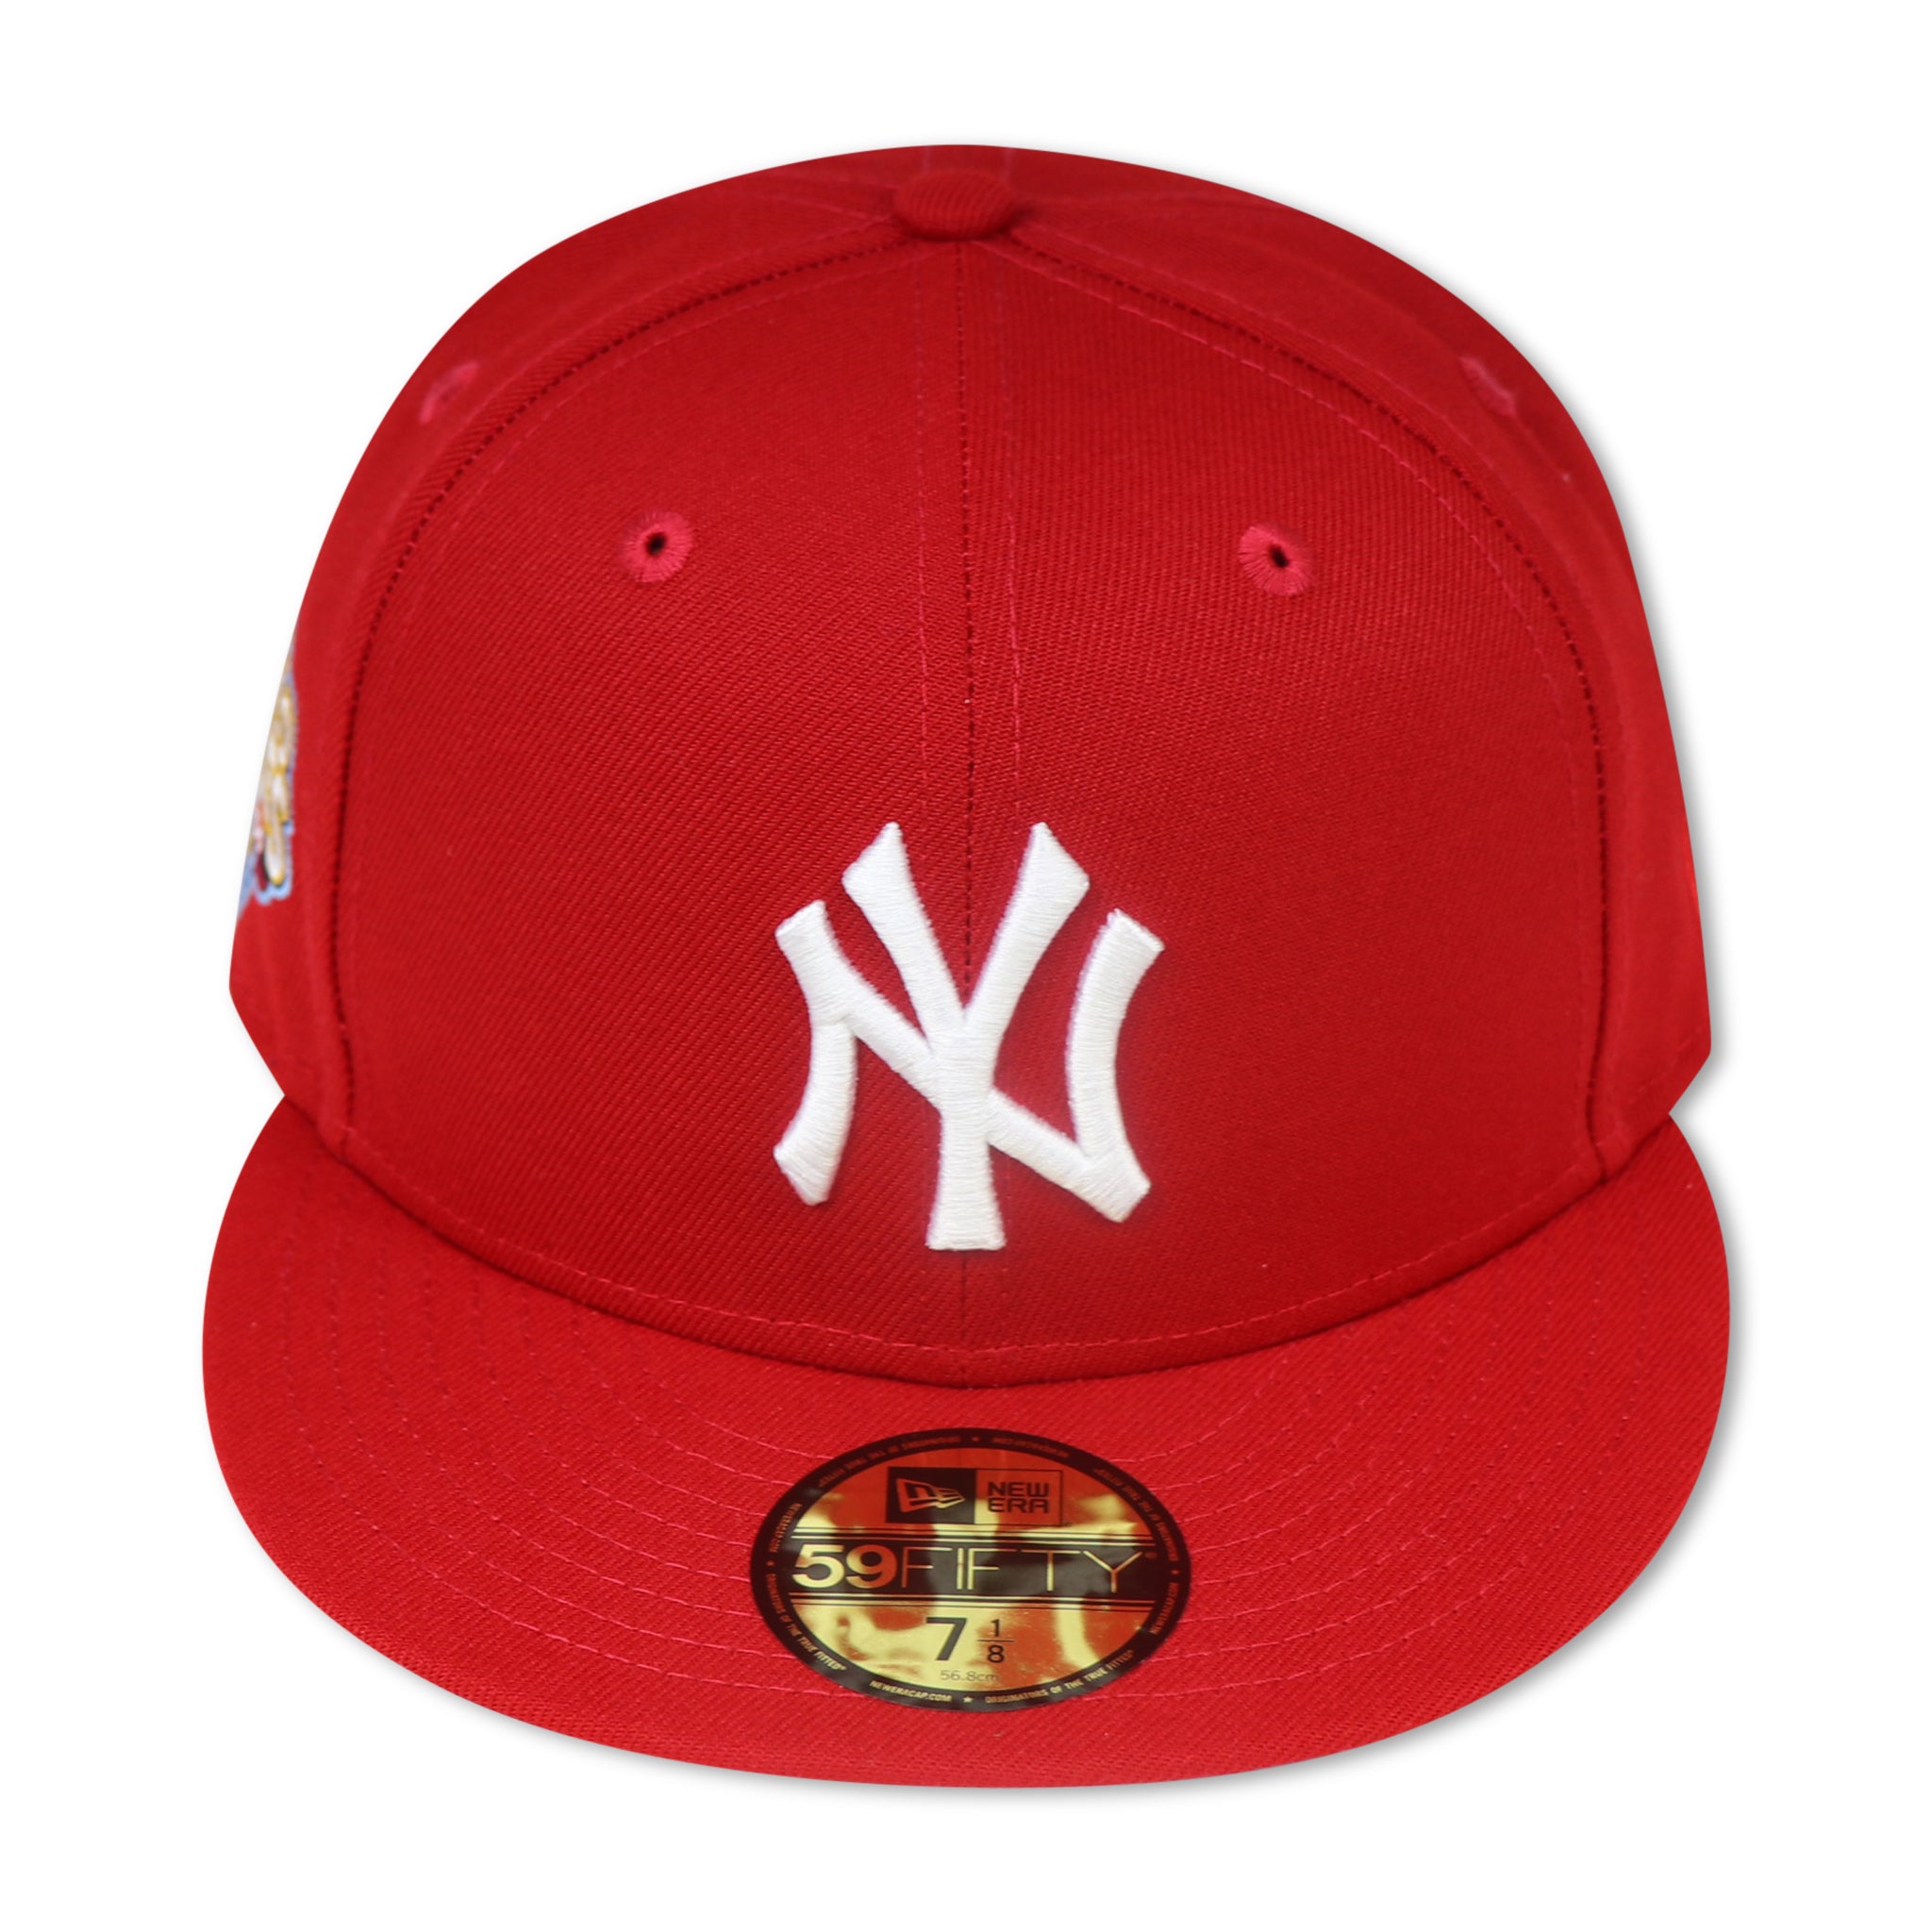 NEW YORK YANKEES(RED)"2009 WORLDSERIES" NEW ERA 59FIFTY FITTED (SKY BLUE BOTTOM)